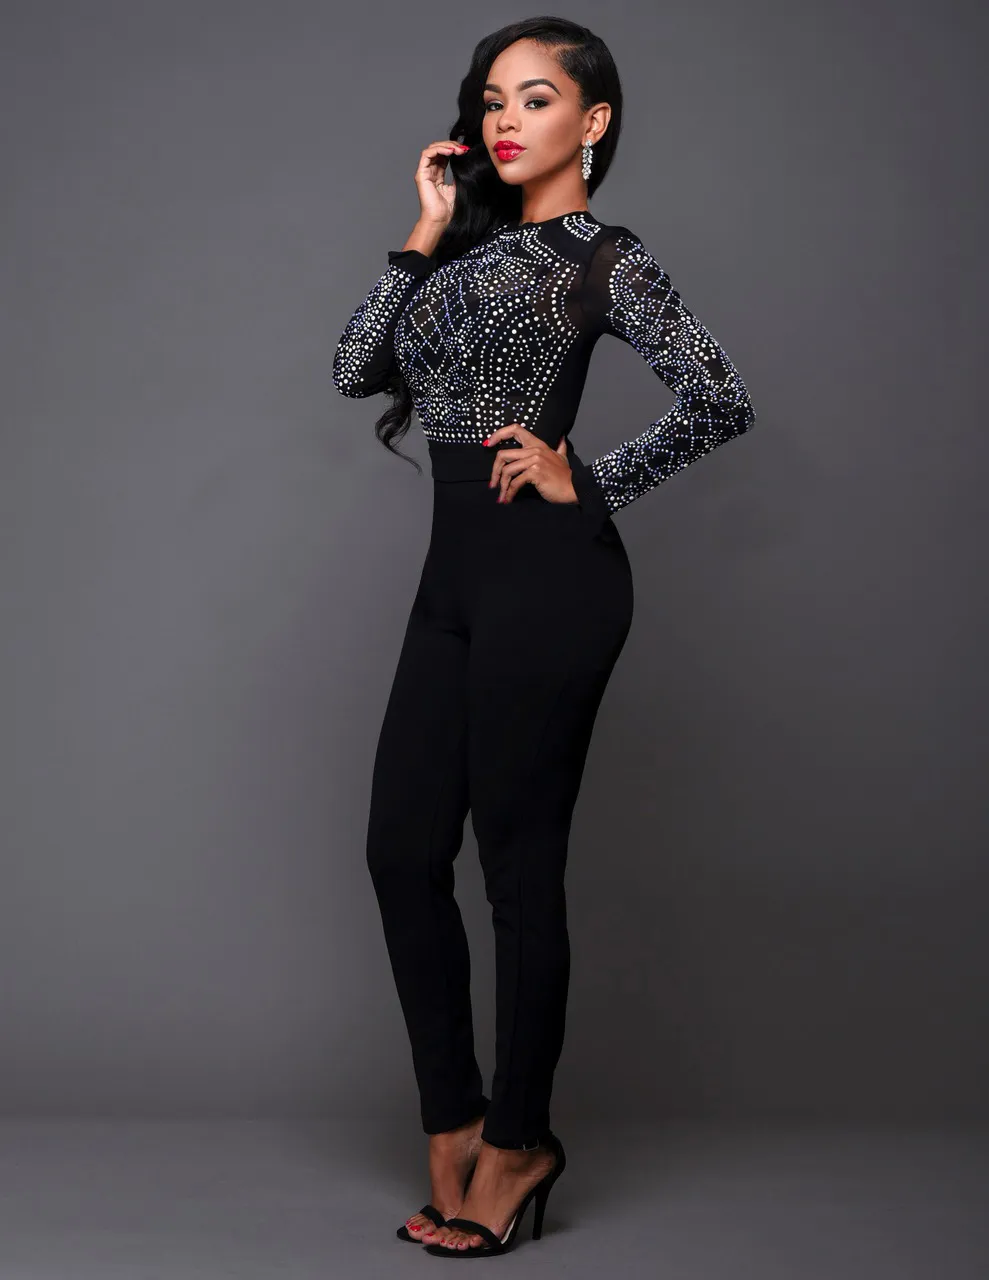 Women Sequins Jumpers For Night Club Eur Fashion High Waist Mesh See Through Skinny Tracksuit Lady Bodycon Tracksuit